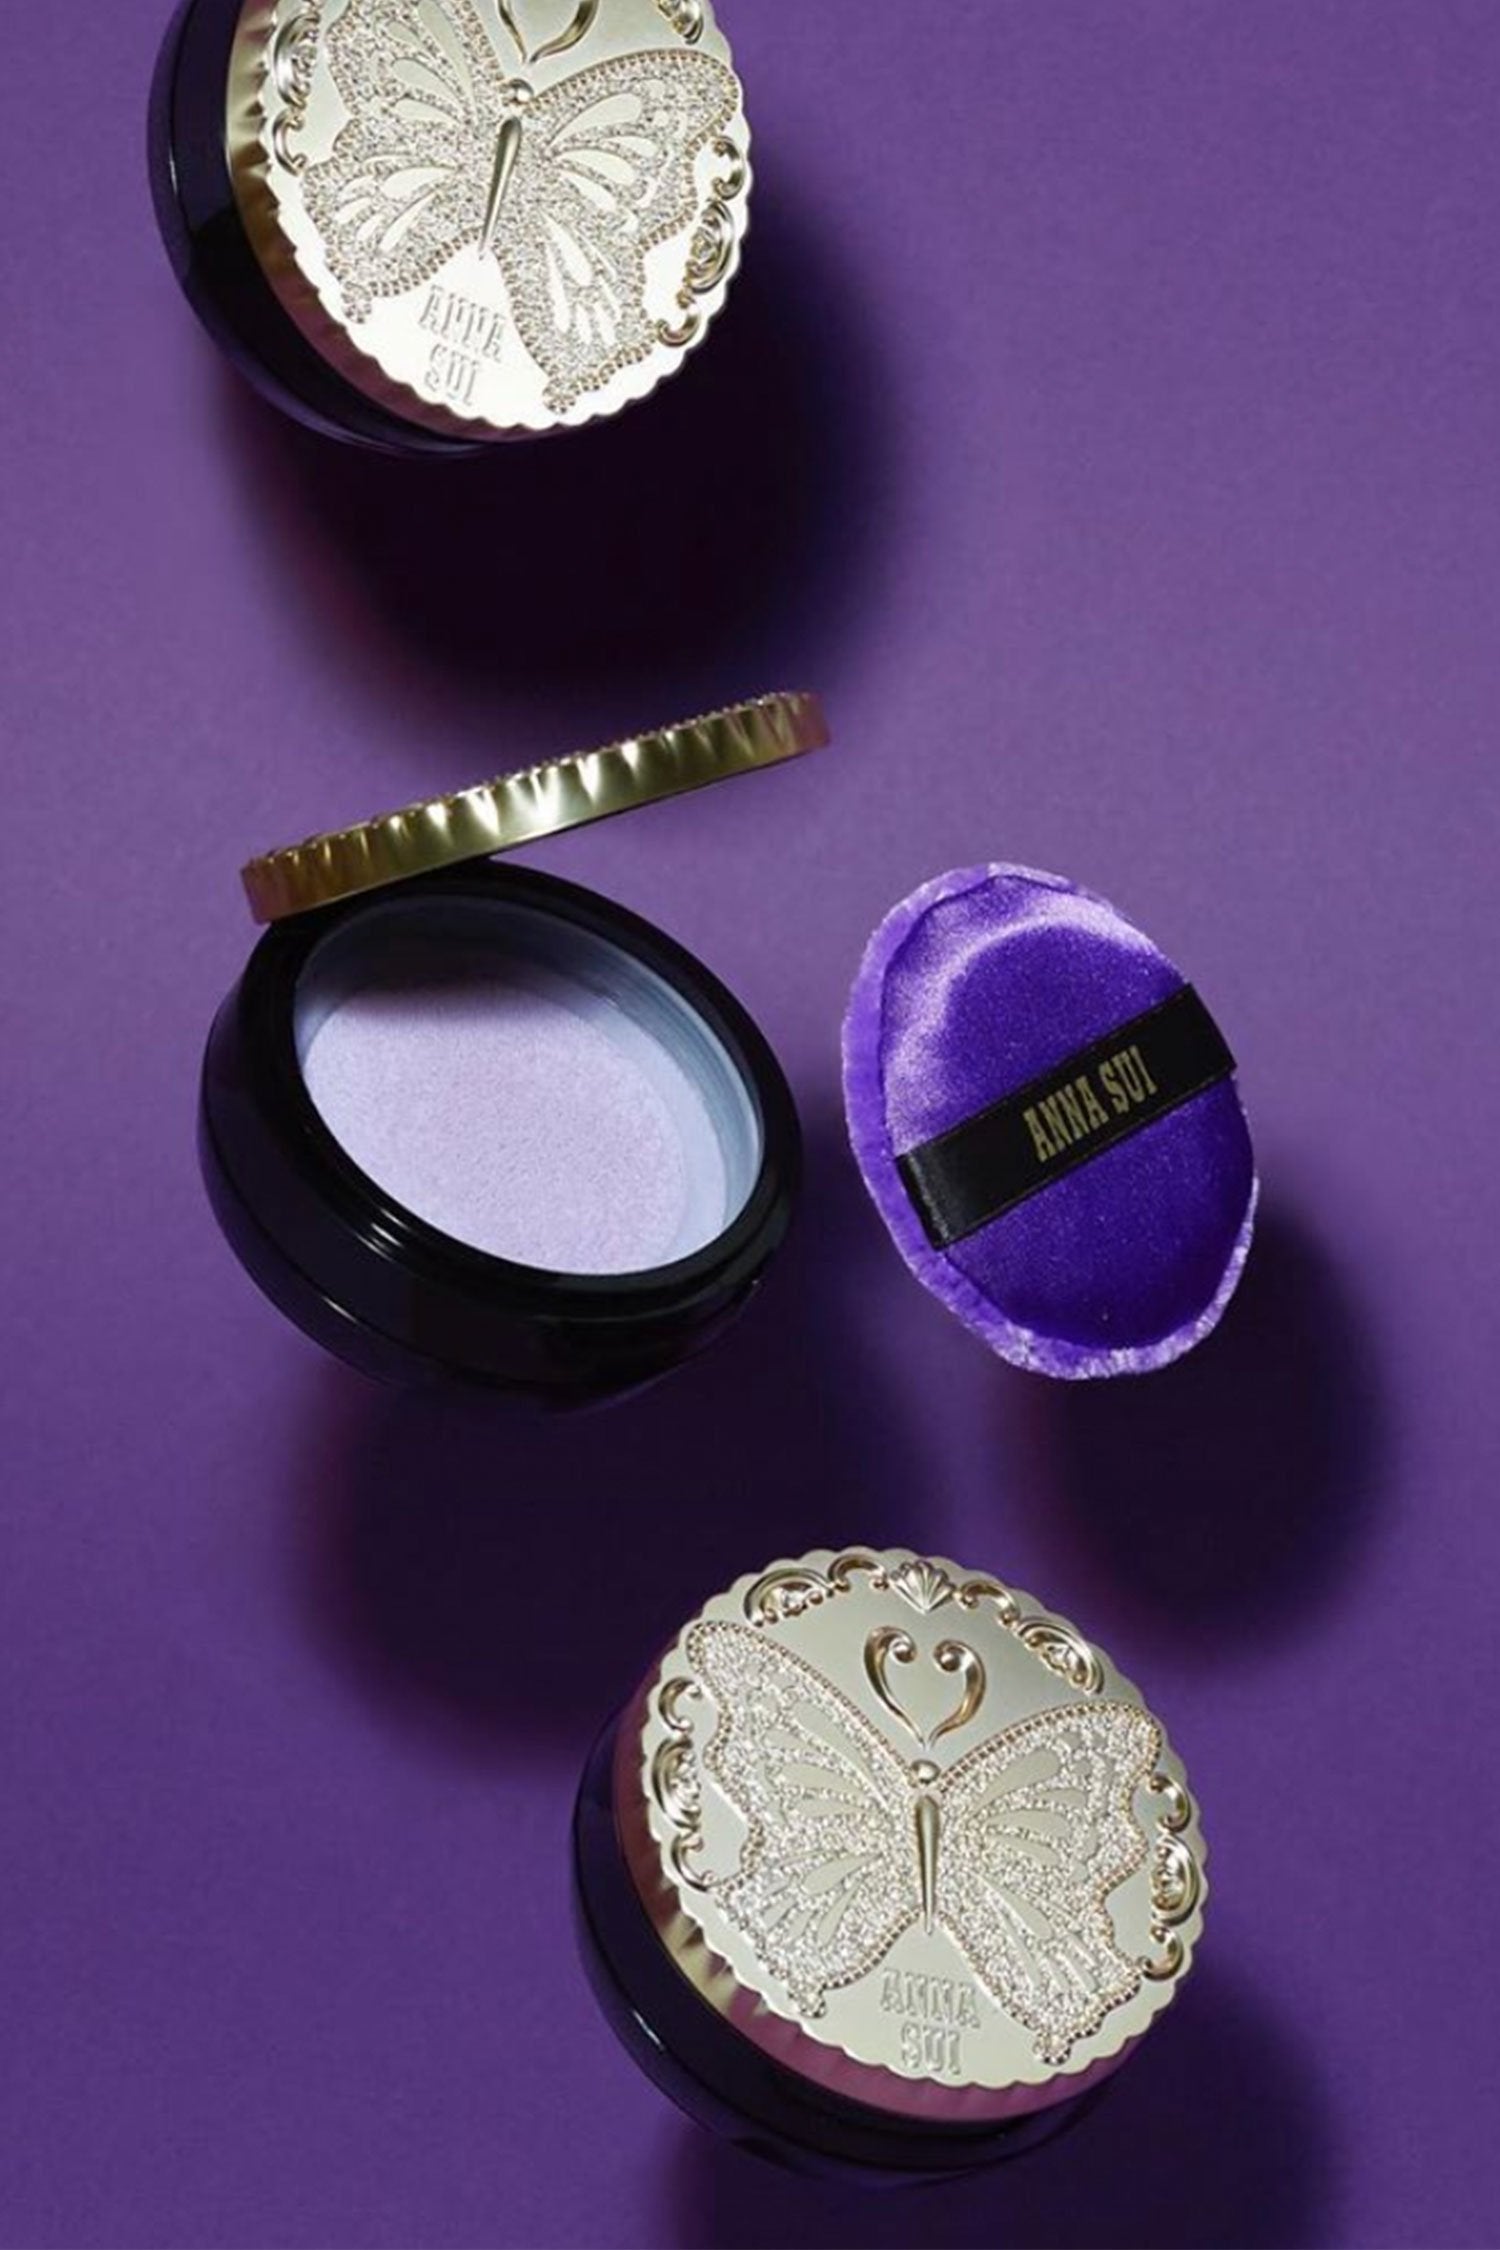 Ensemble of cases, showing a closed Golden lid and black bottom, and open with mirror and purple pad 